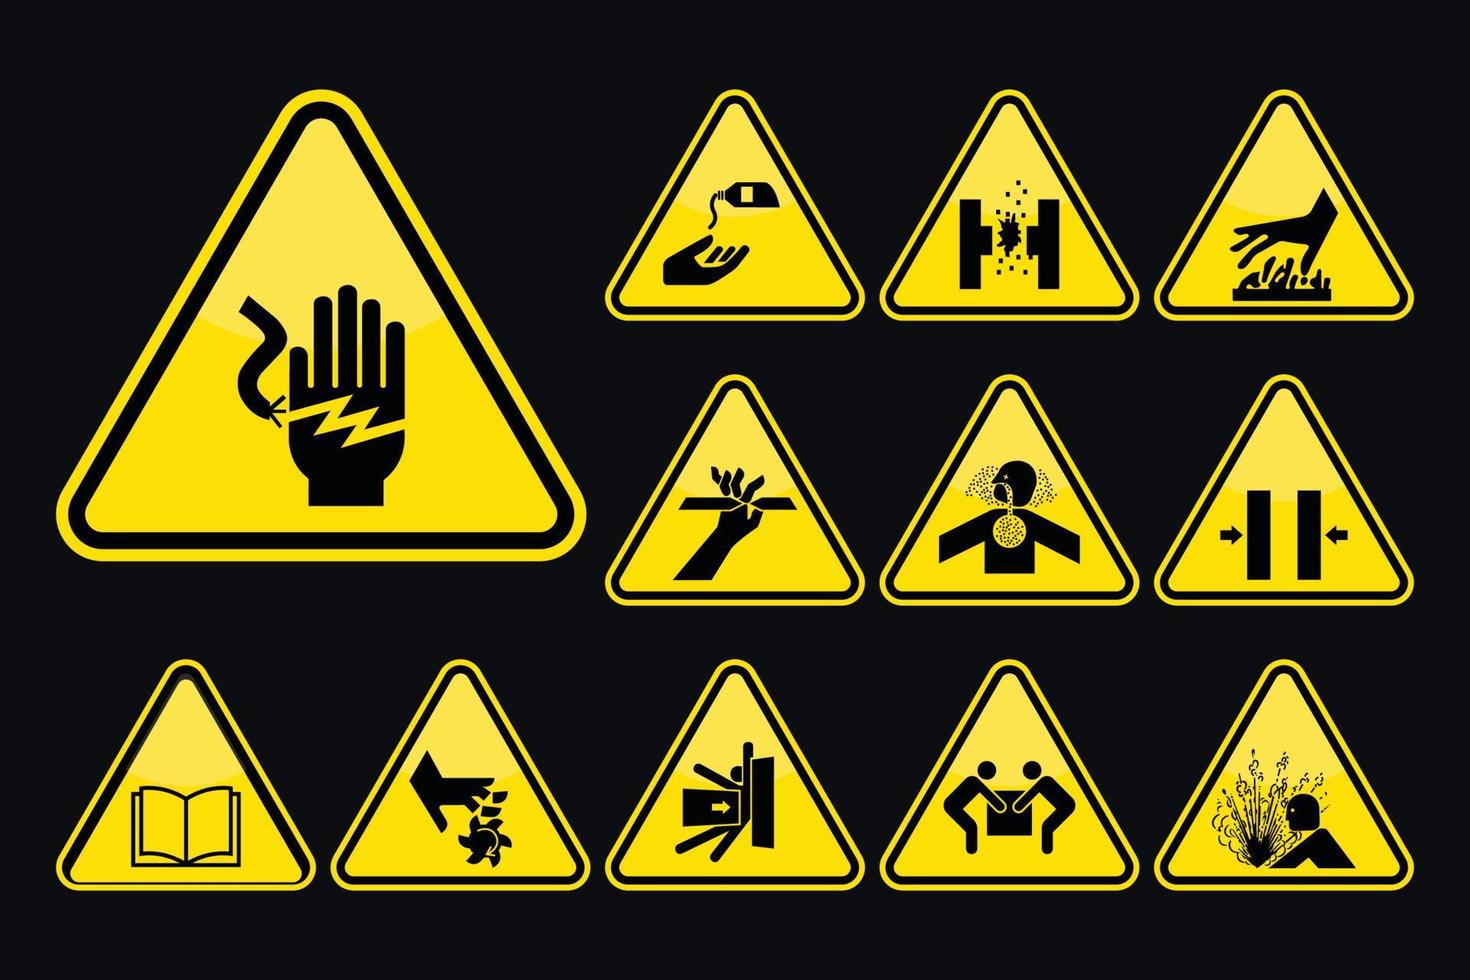 Set Of Road Sign Icons Vector Illustration In Flat design